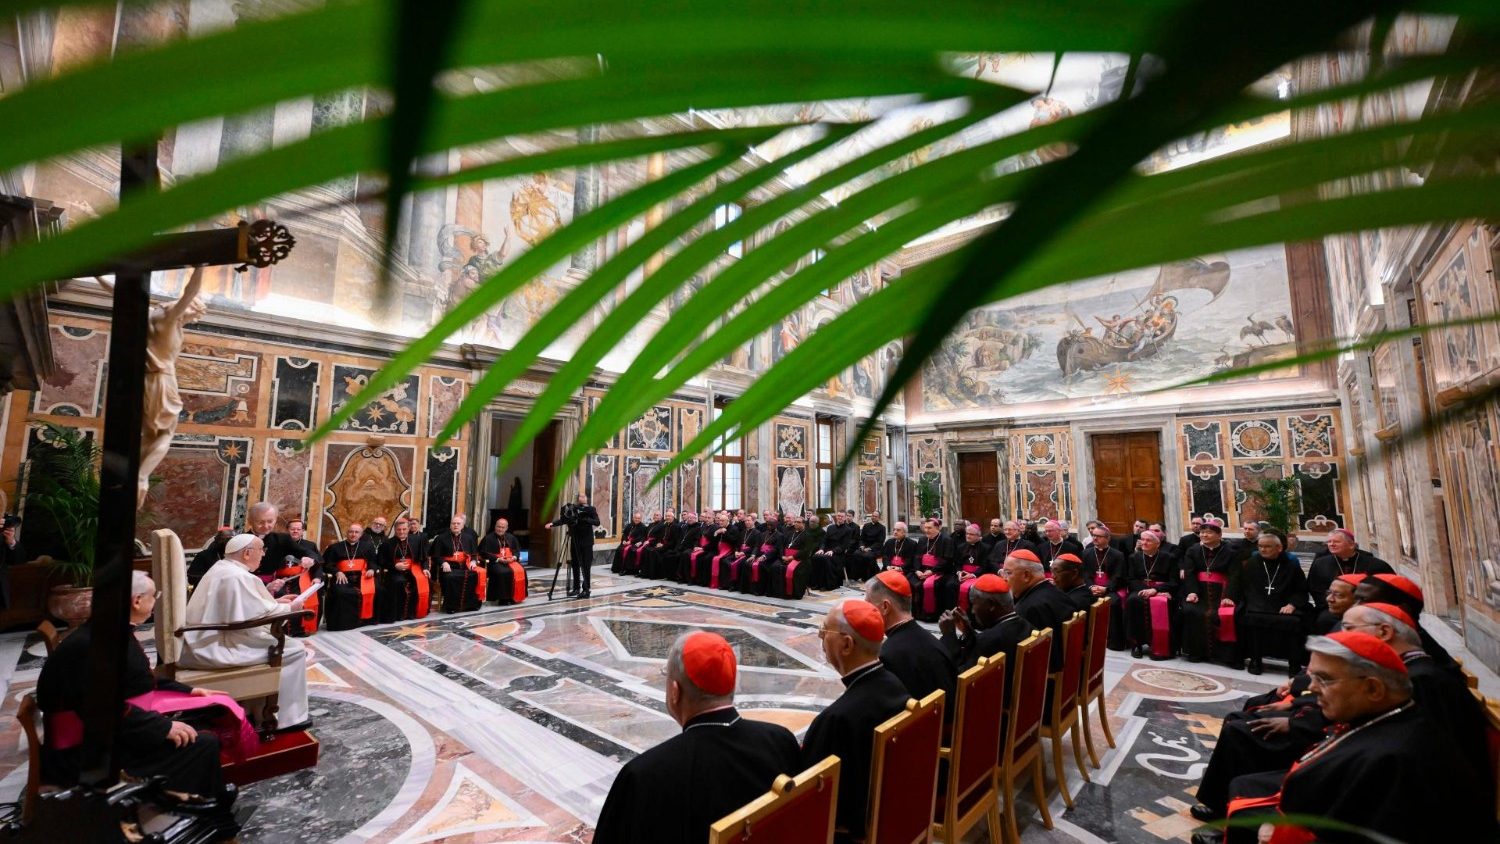 Francis: Without liturgical reform there is no reform of the Church